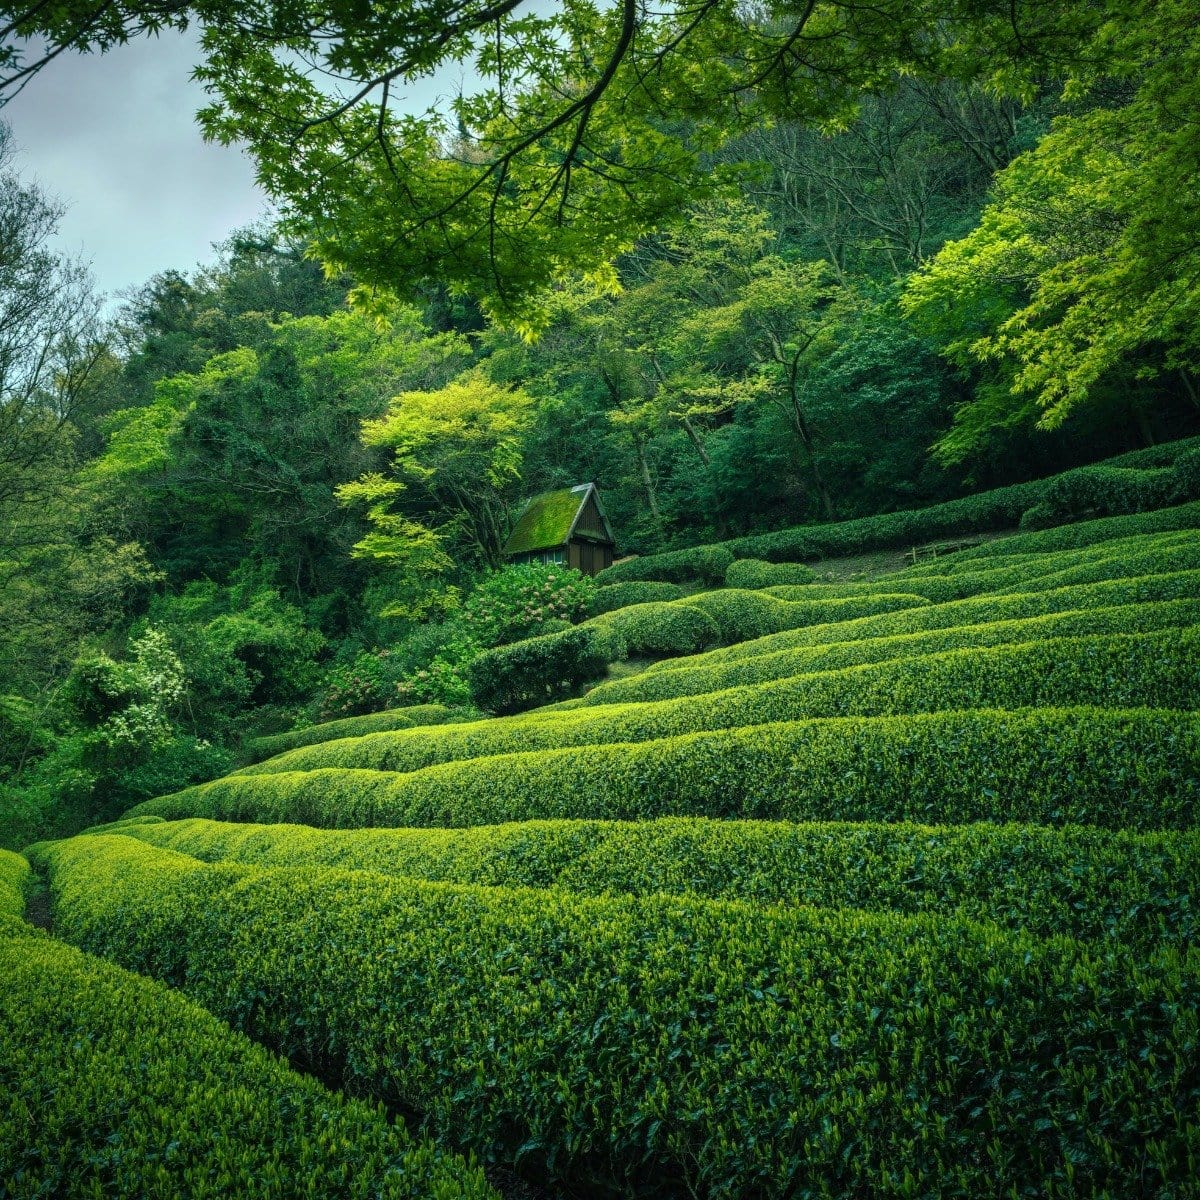 A serene tea plantation featuring lush, meticulously arranged rows of vibrant green tea plants. The background includes a small wooden hut nestled among dense, verdant trees and foliage. Overhead, branches and leaves frame the picturesque landscape – a perfect setting to enjoy Magic Hour Sencha Kyoto Green Tea.